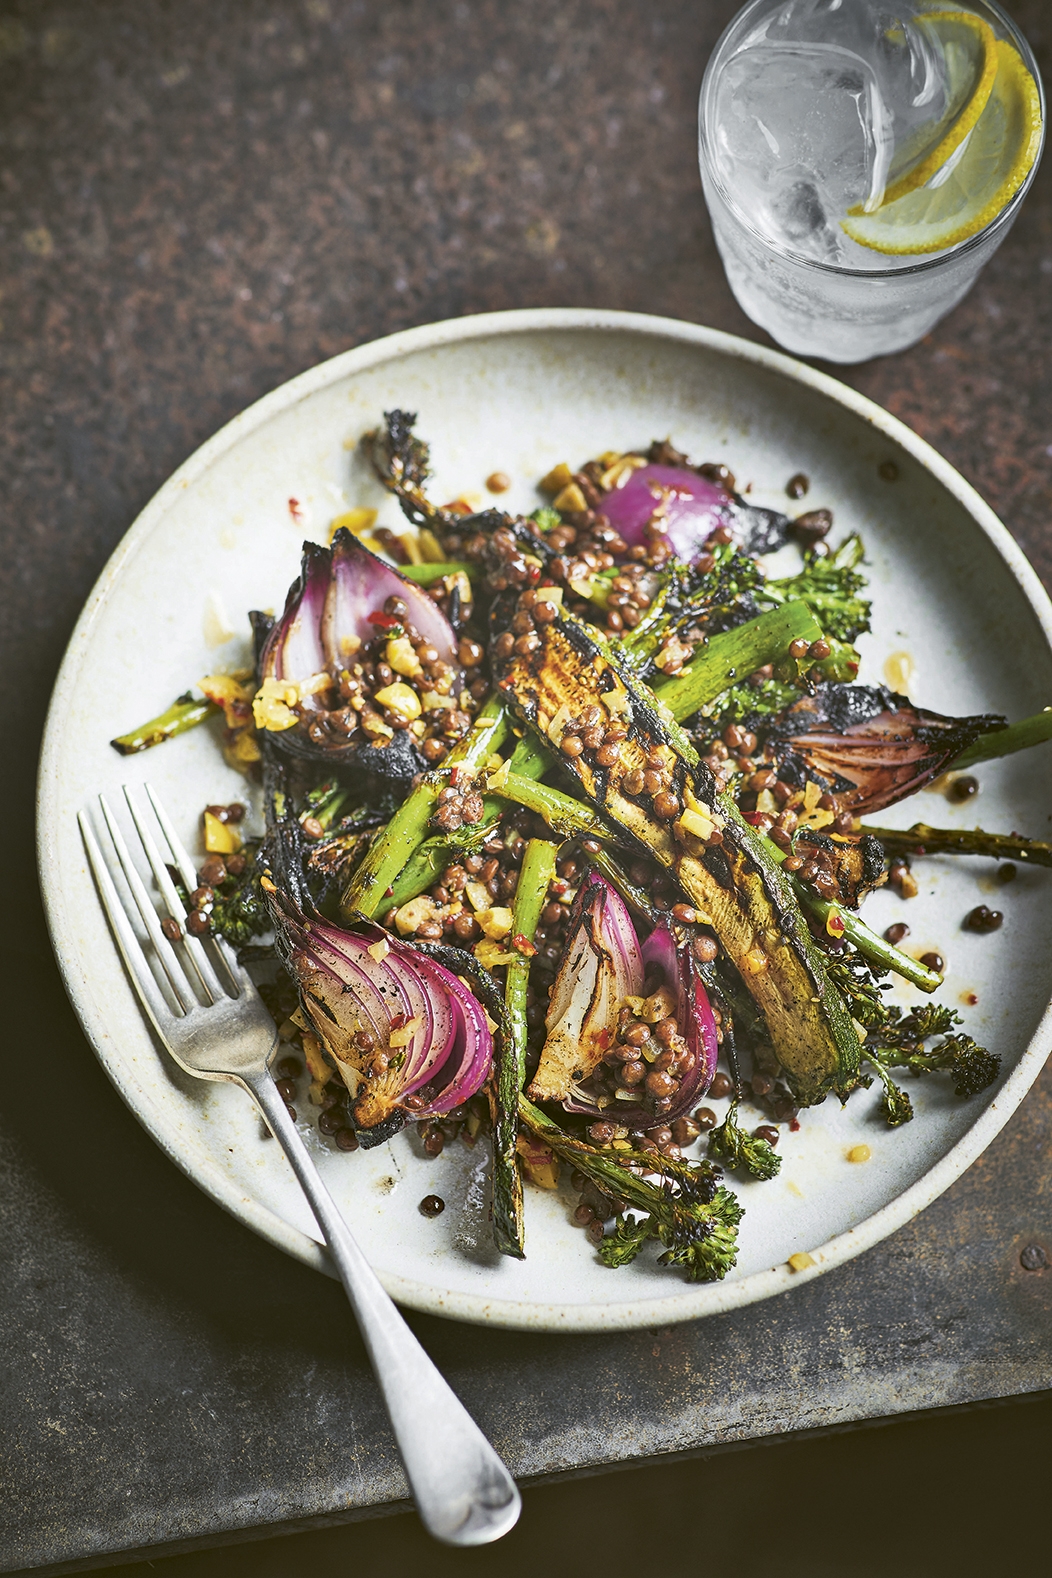 Broccoli Grilled Courgettes Lentils